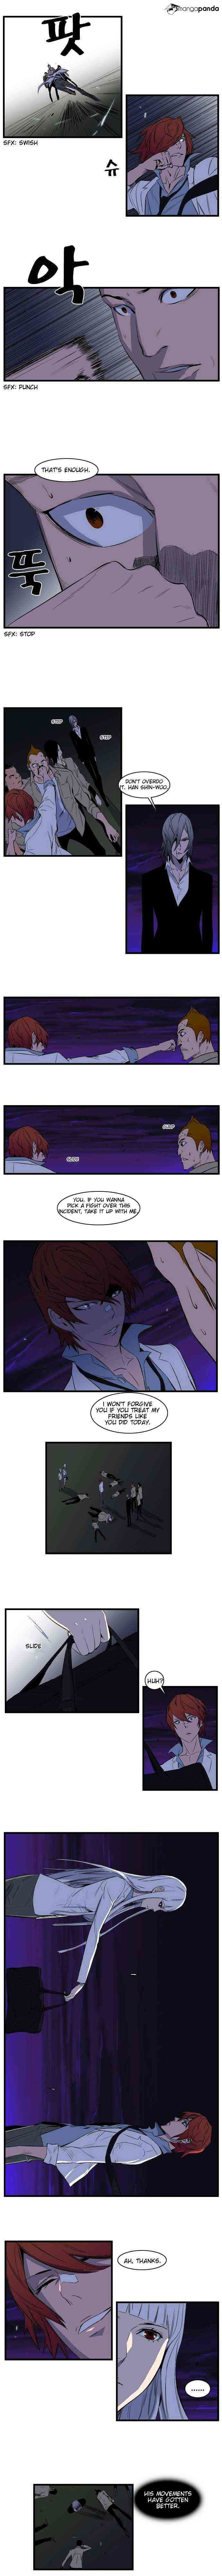 Noblesse Chapter 103 page 4